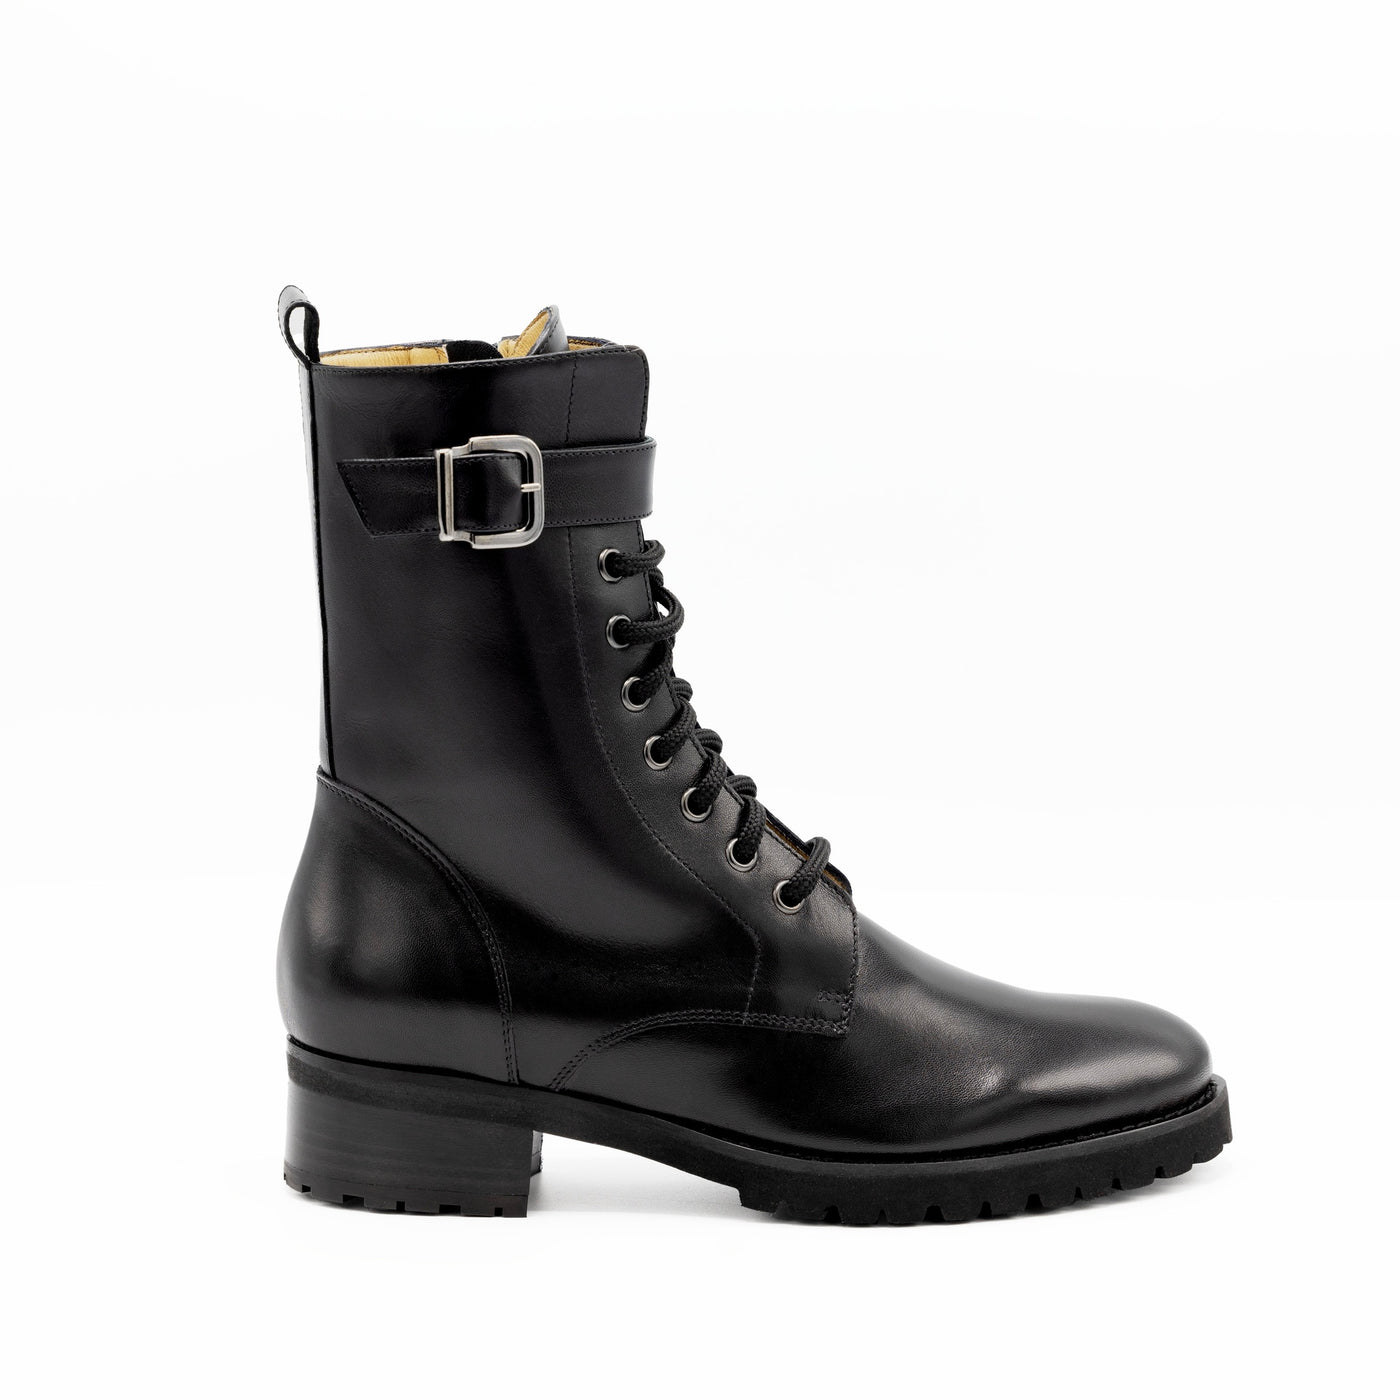 Black leather combat boots with extra light rubber soles